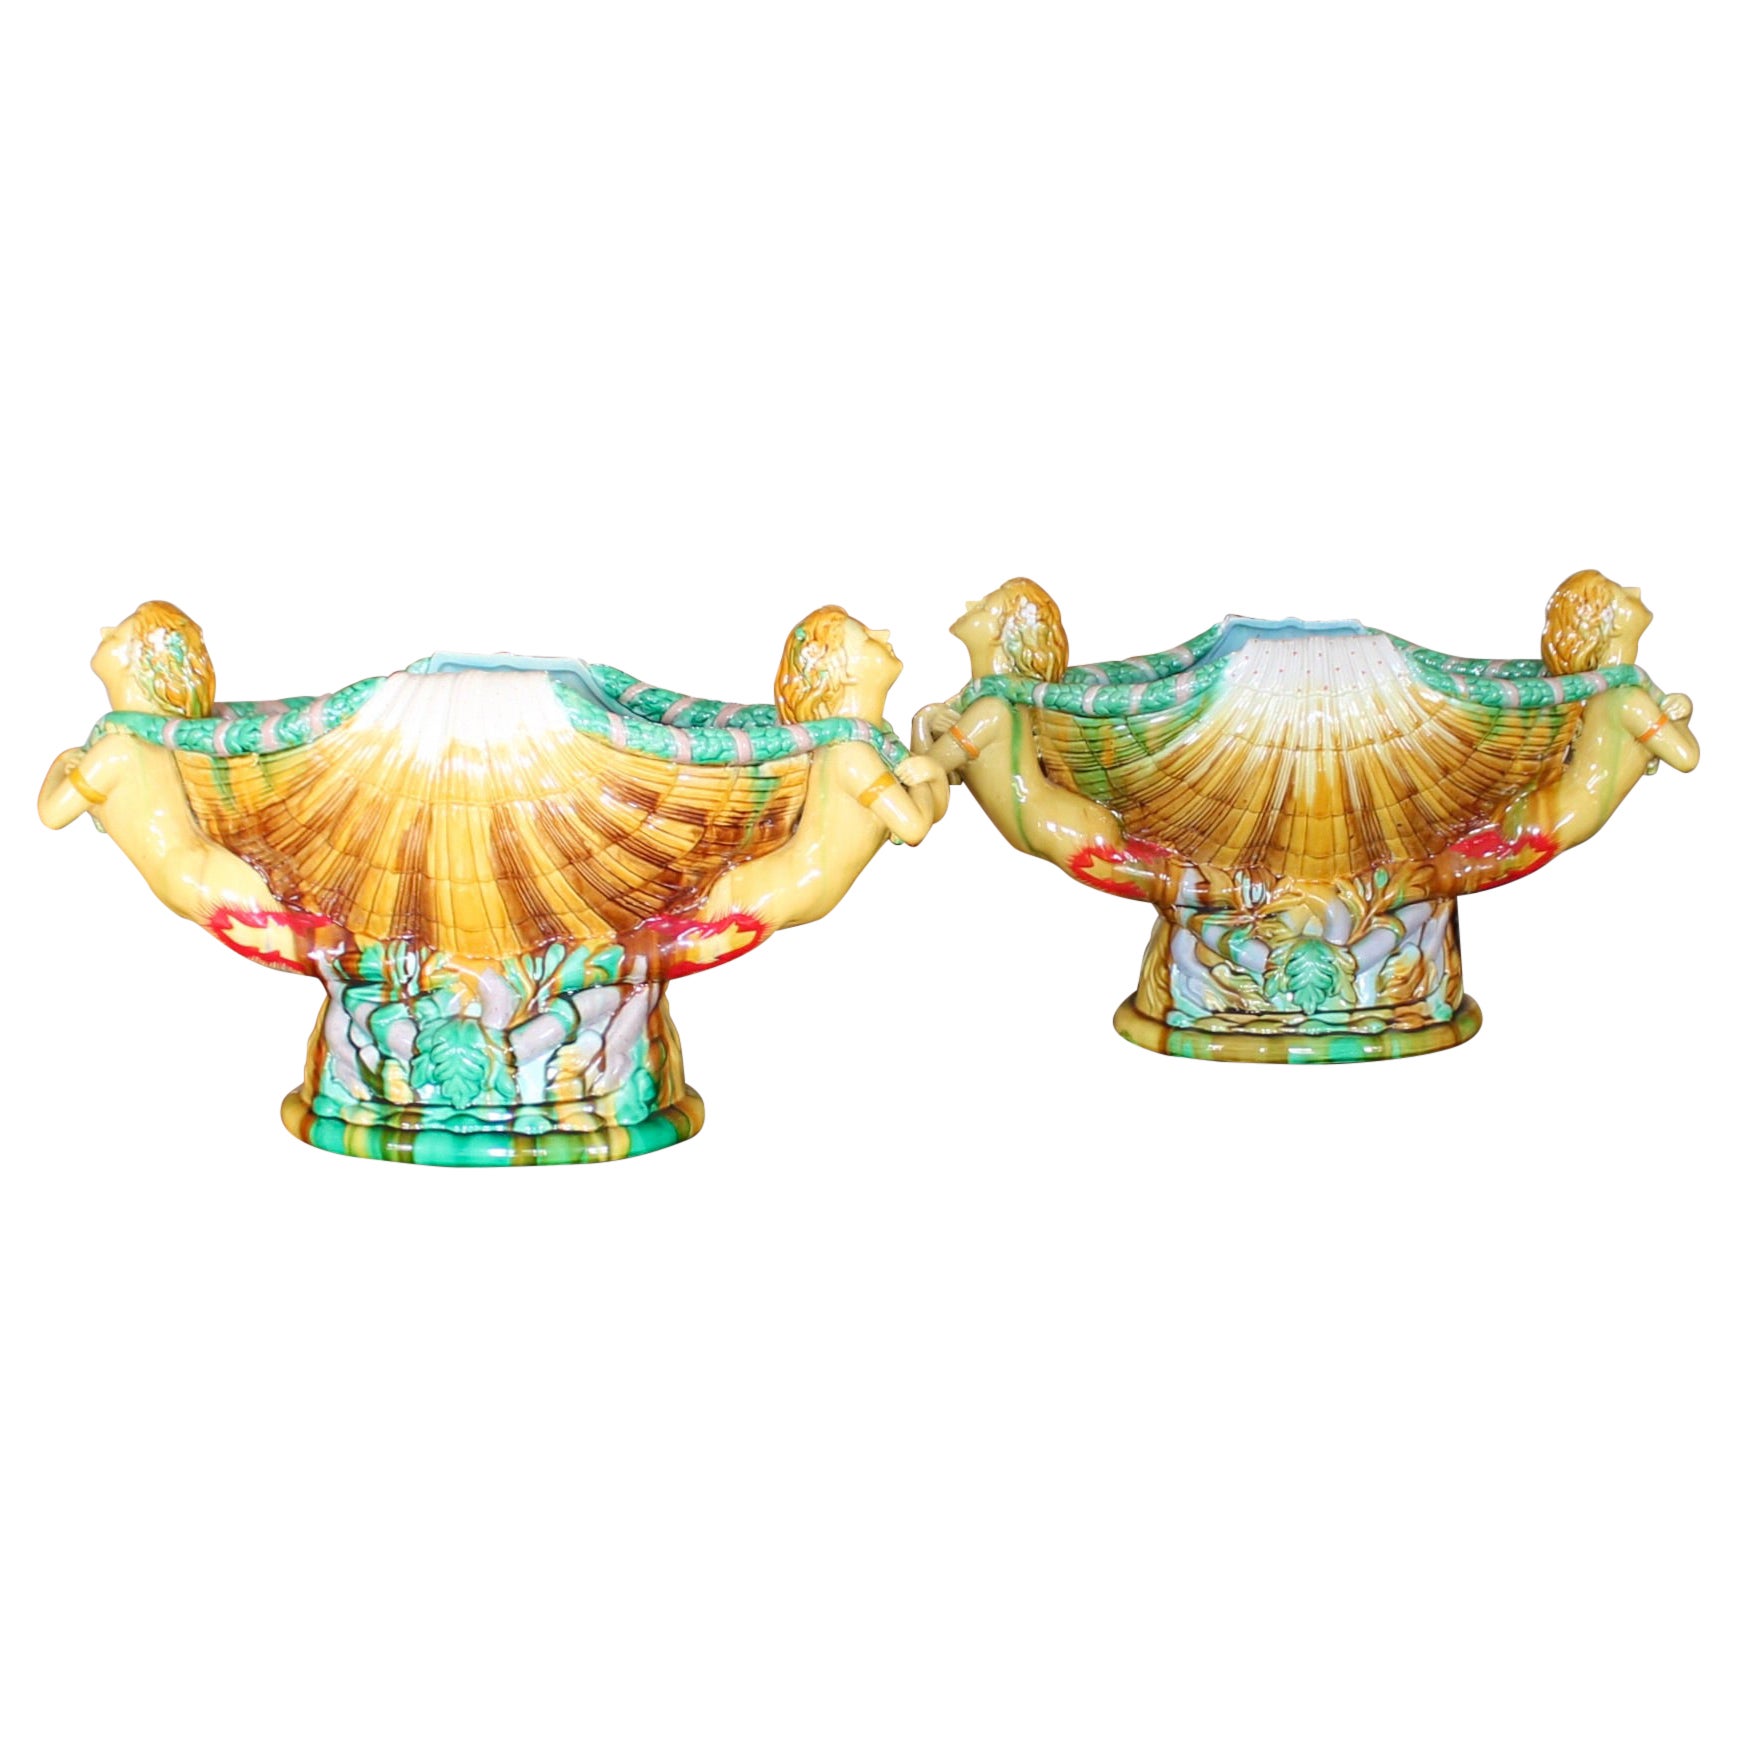 Pair Large Majolica Seashell Centerpieces With Mermaid Caryatids, after Minton  For Sale